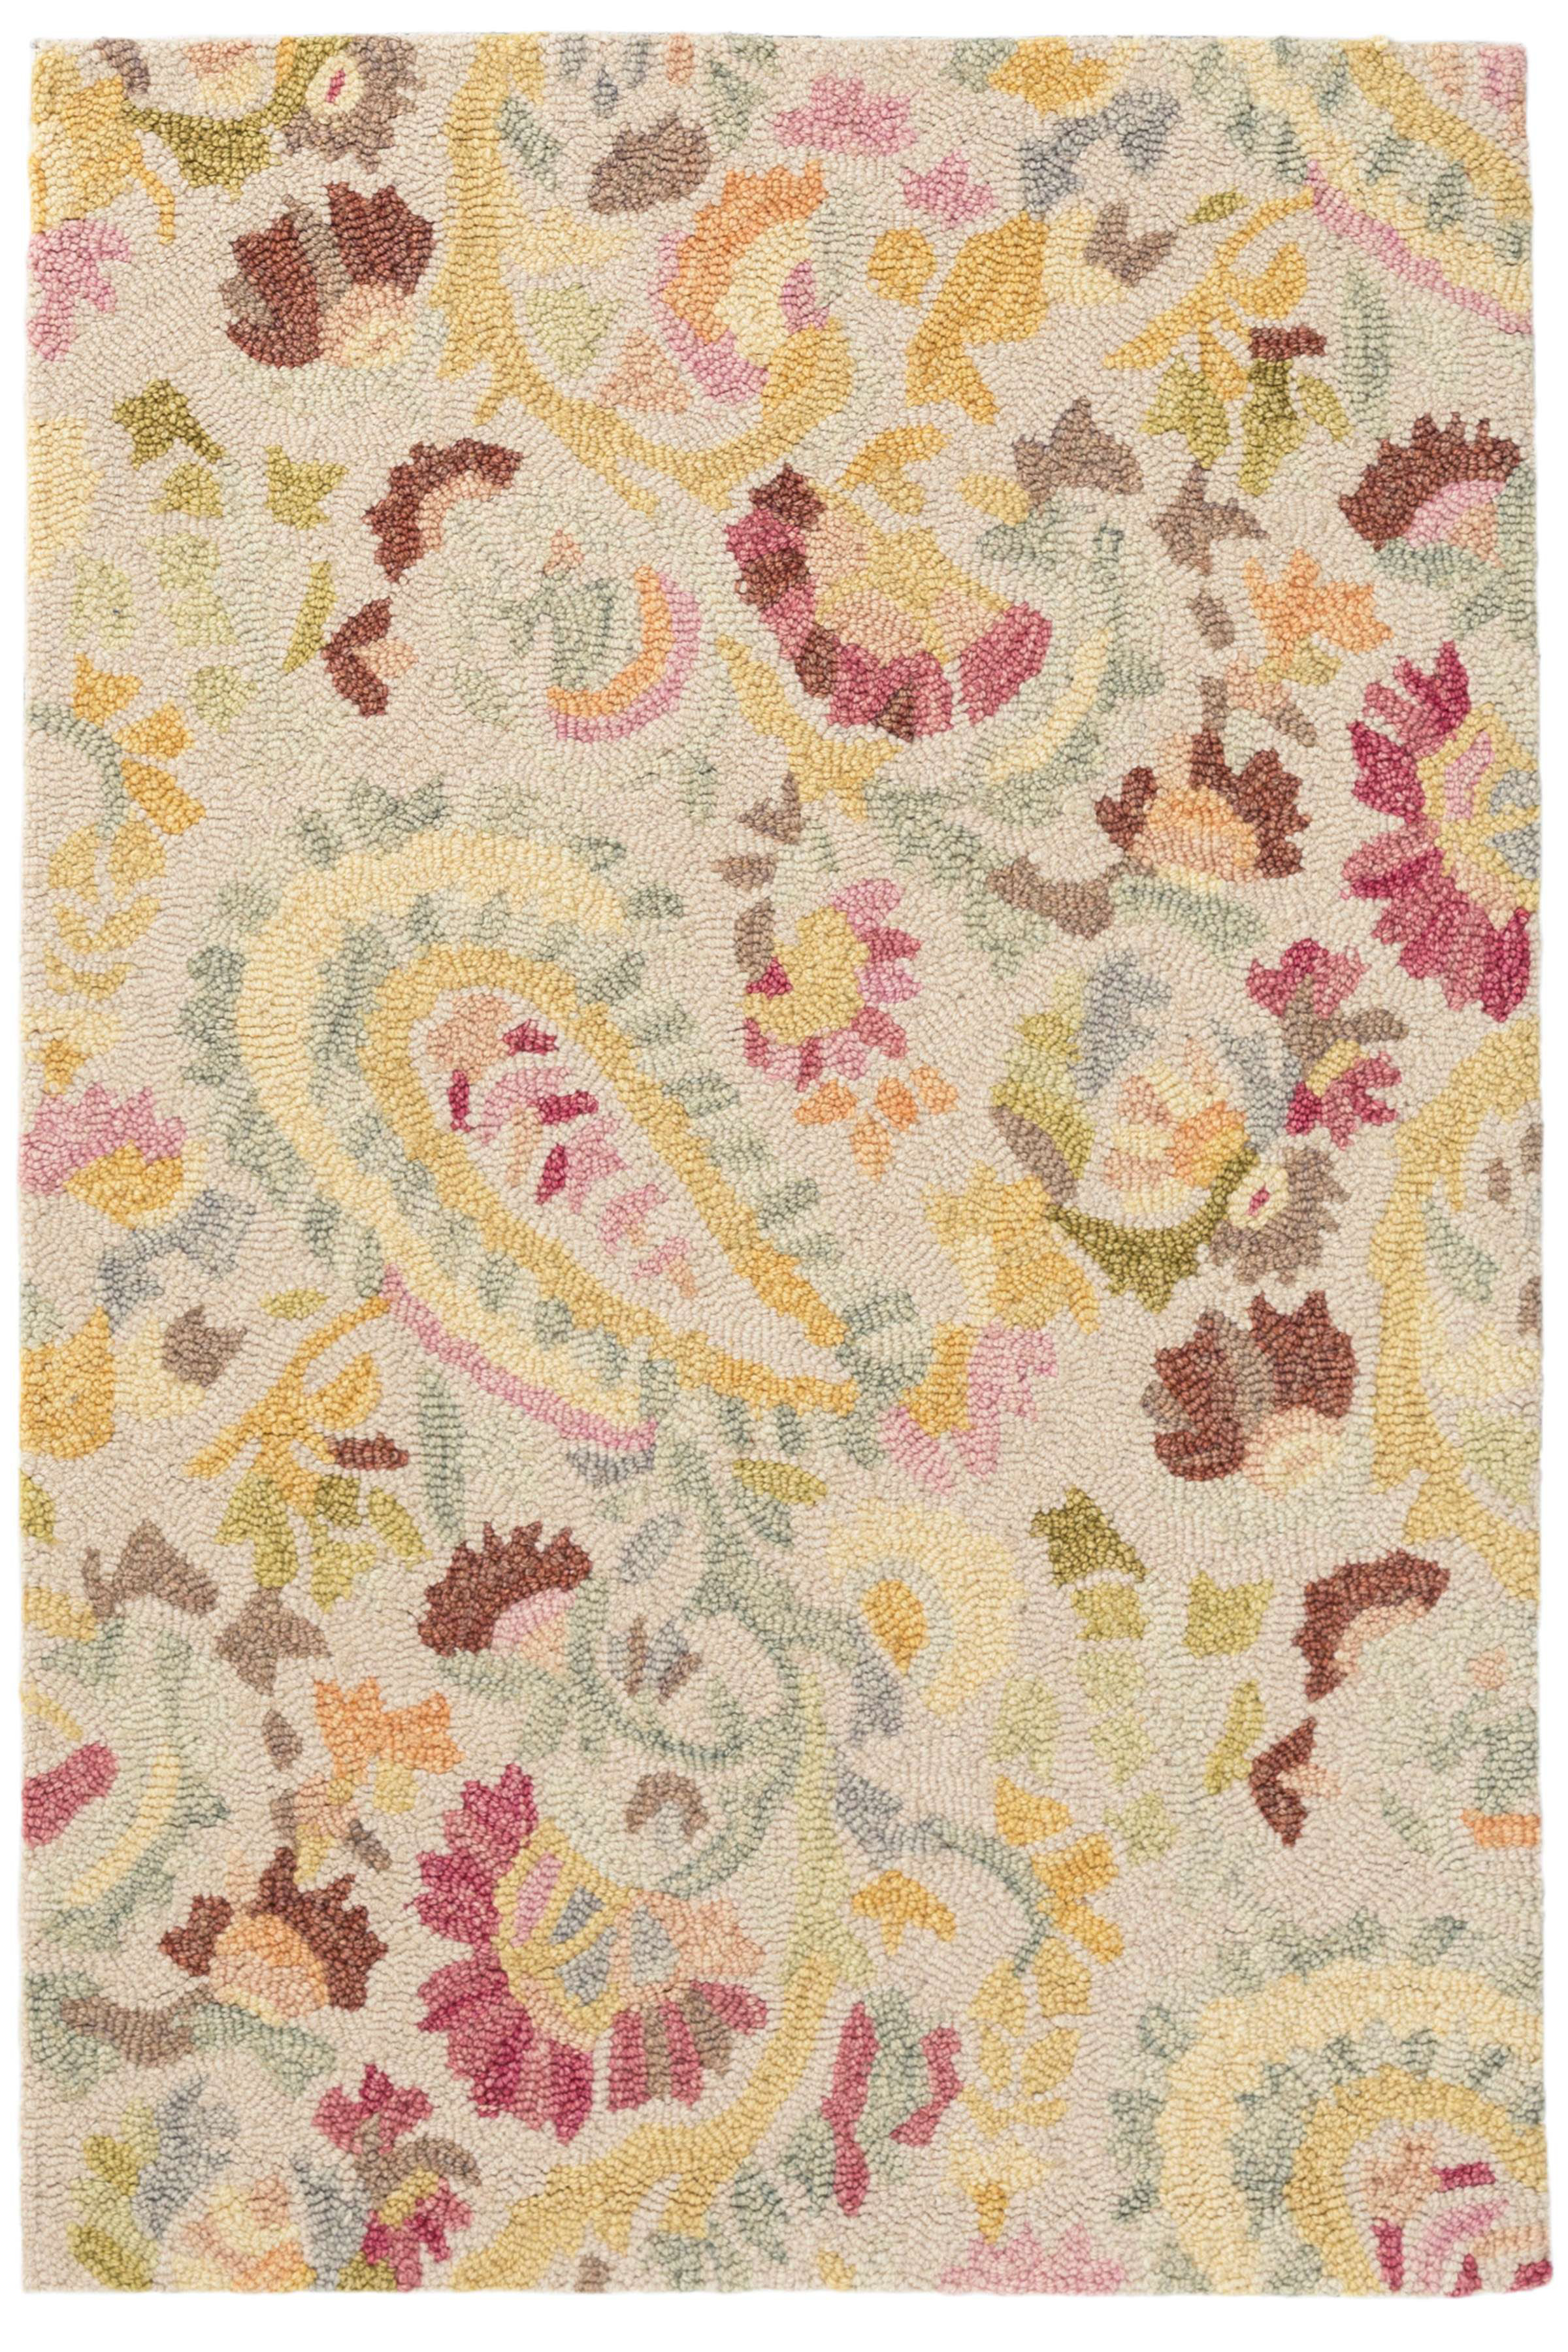 Cat's Paw Pastel Hand Micro Hooked Wool Rug